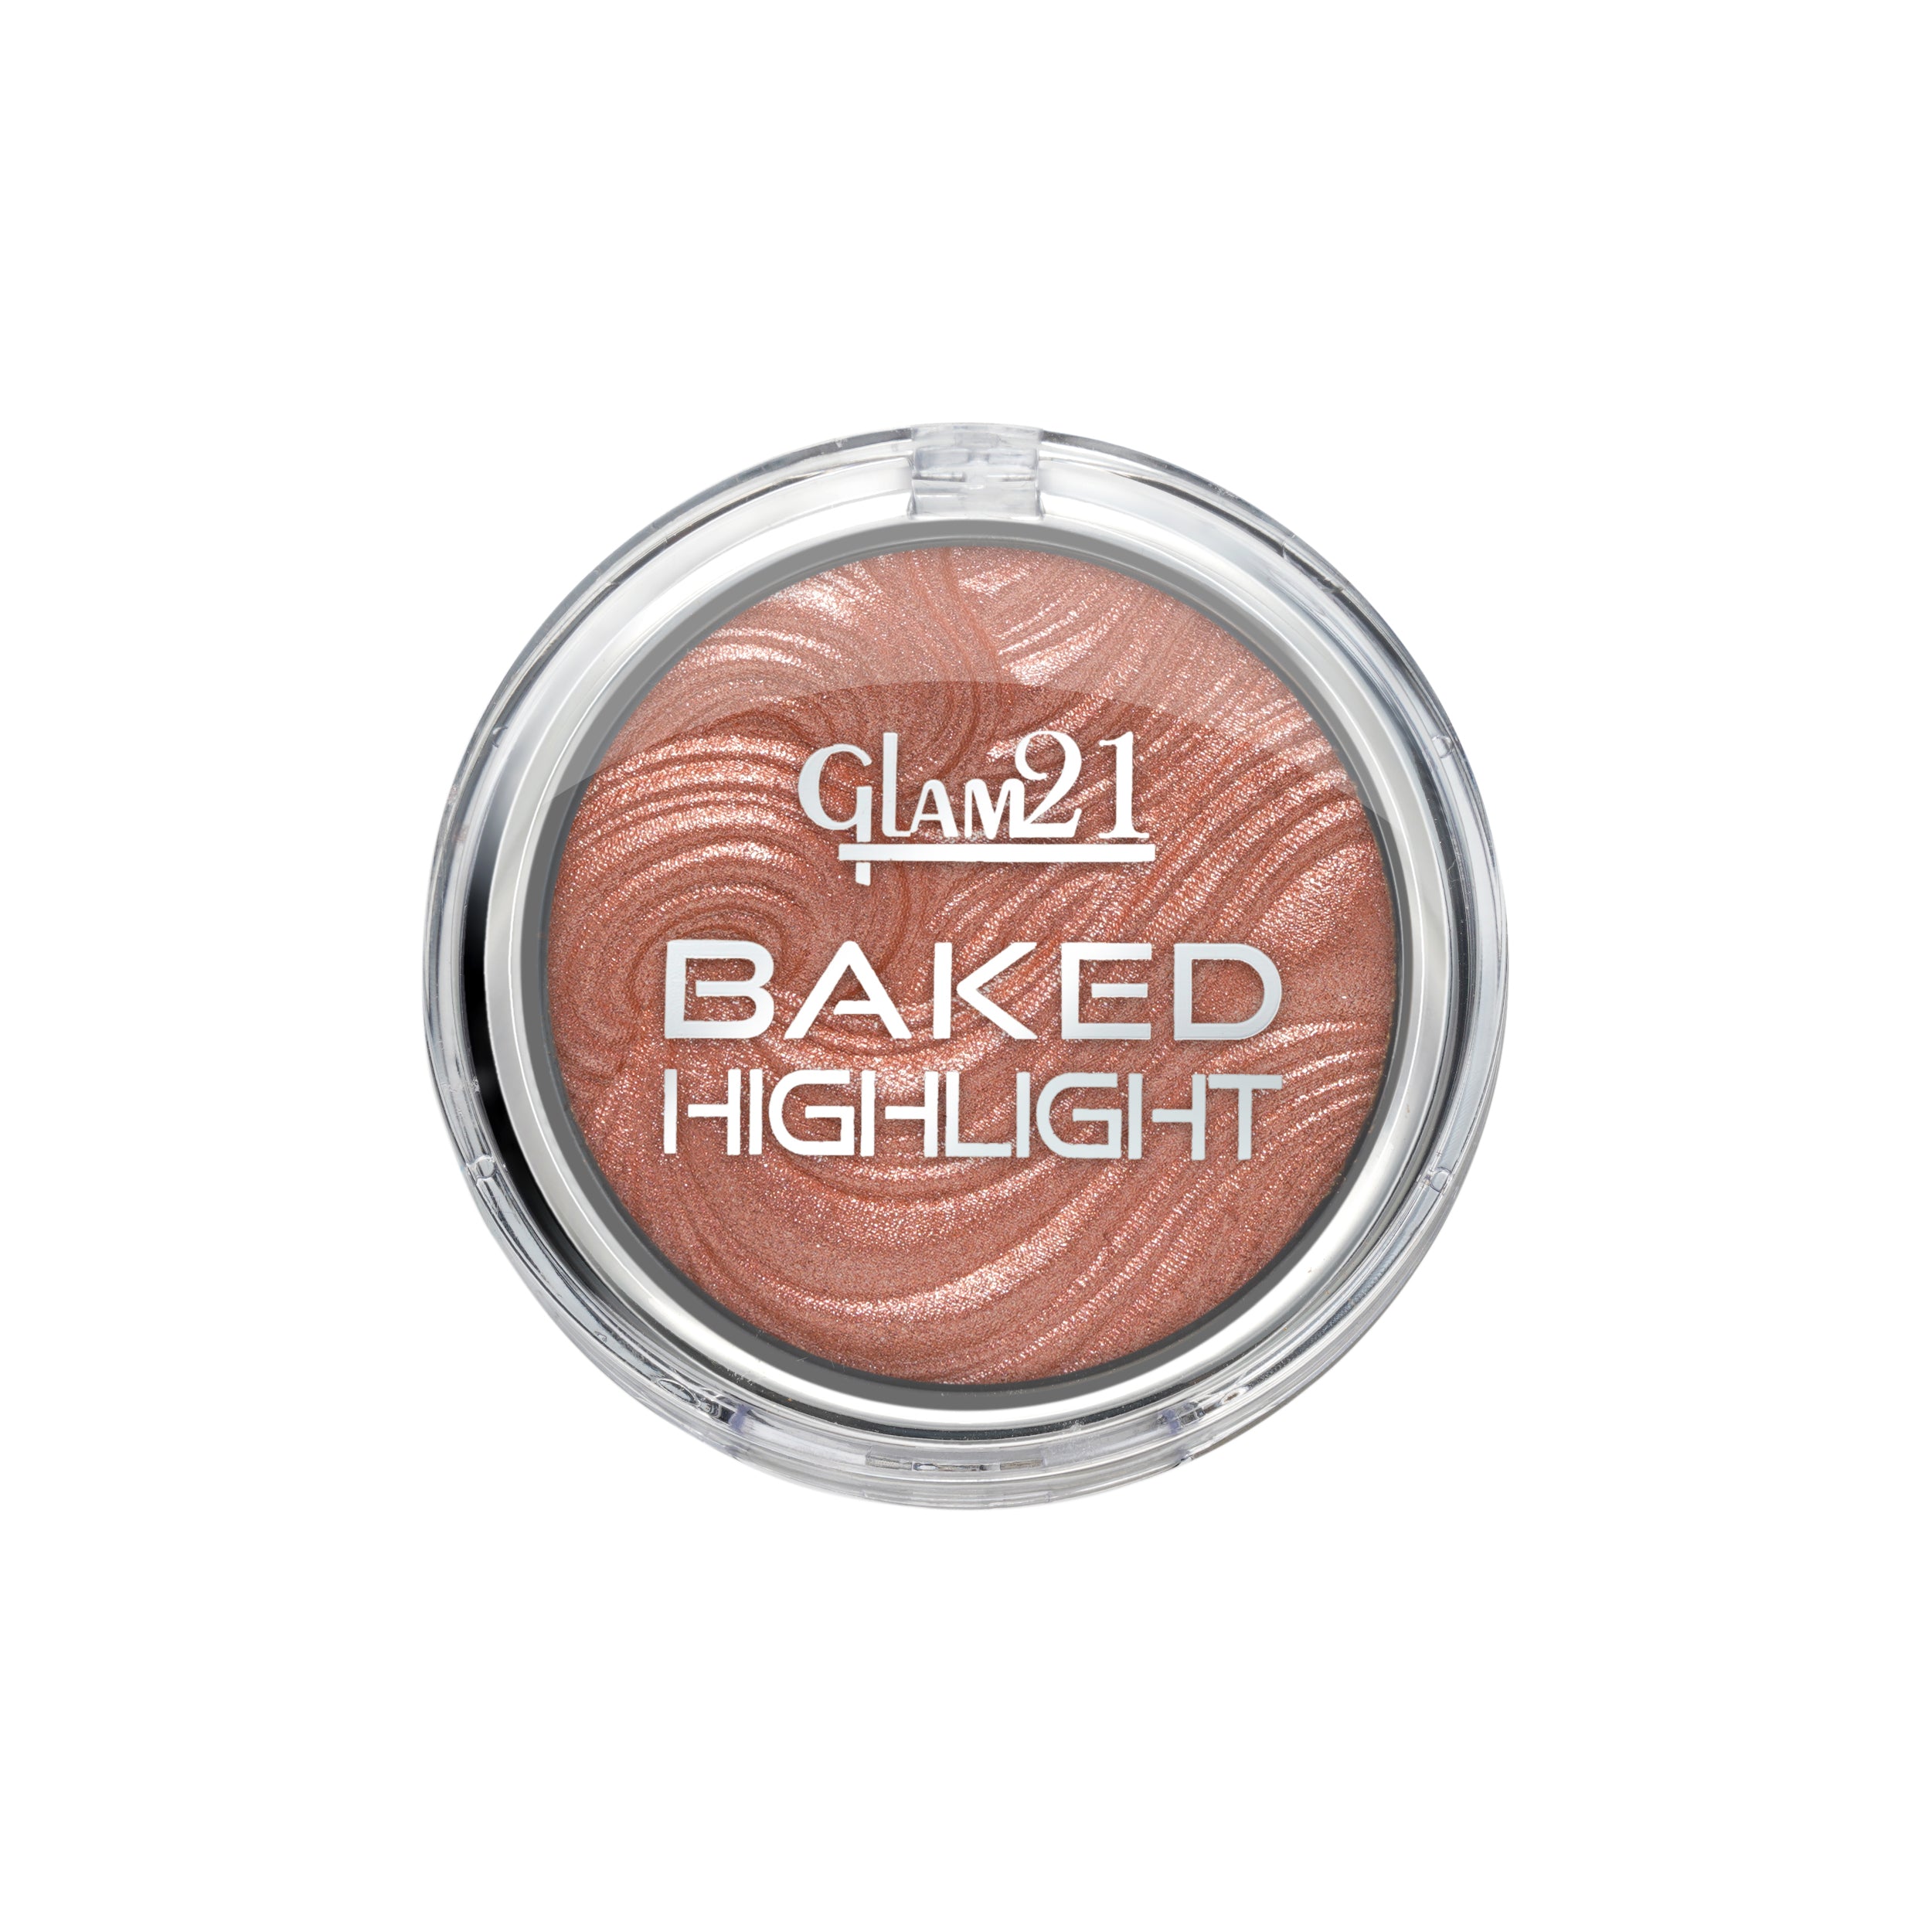 Glam21 Baked Highlighter with Silky Pigments Shimmer Look & Longlasting Mettalic Finish Highlighter, 2.8 g (Shade-06)